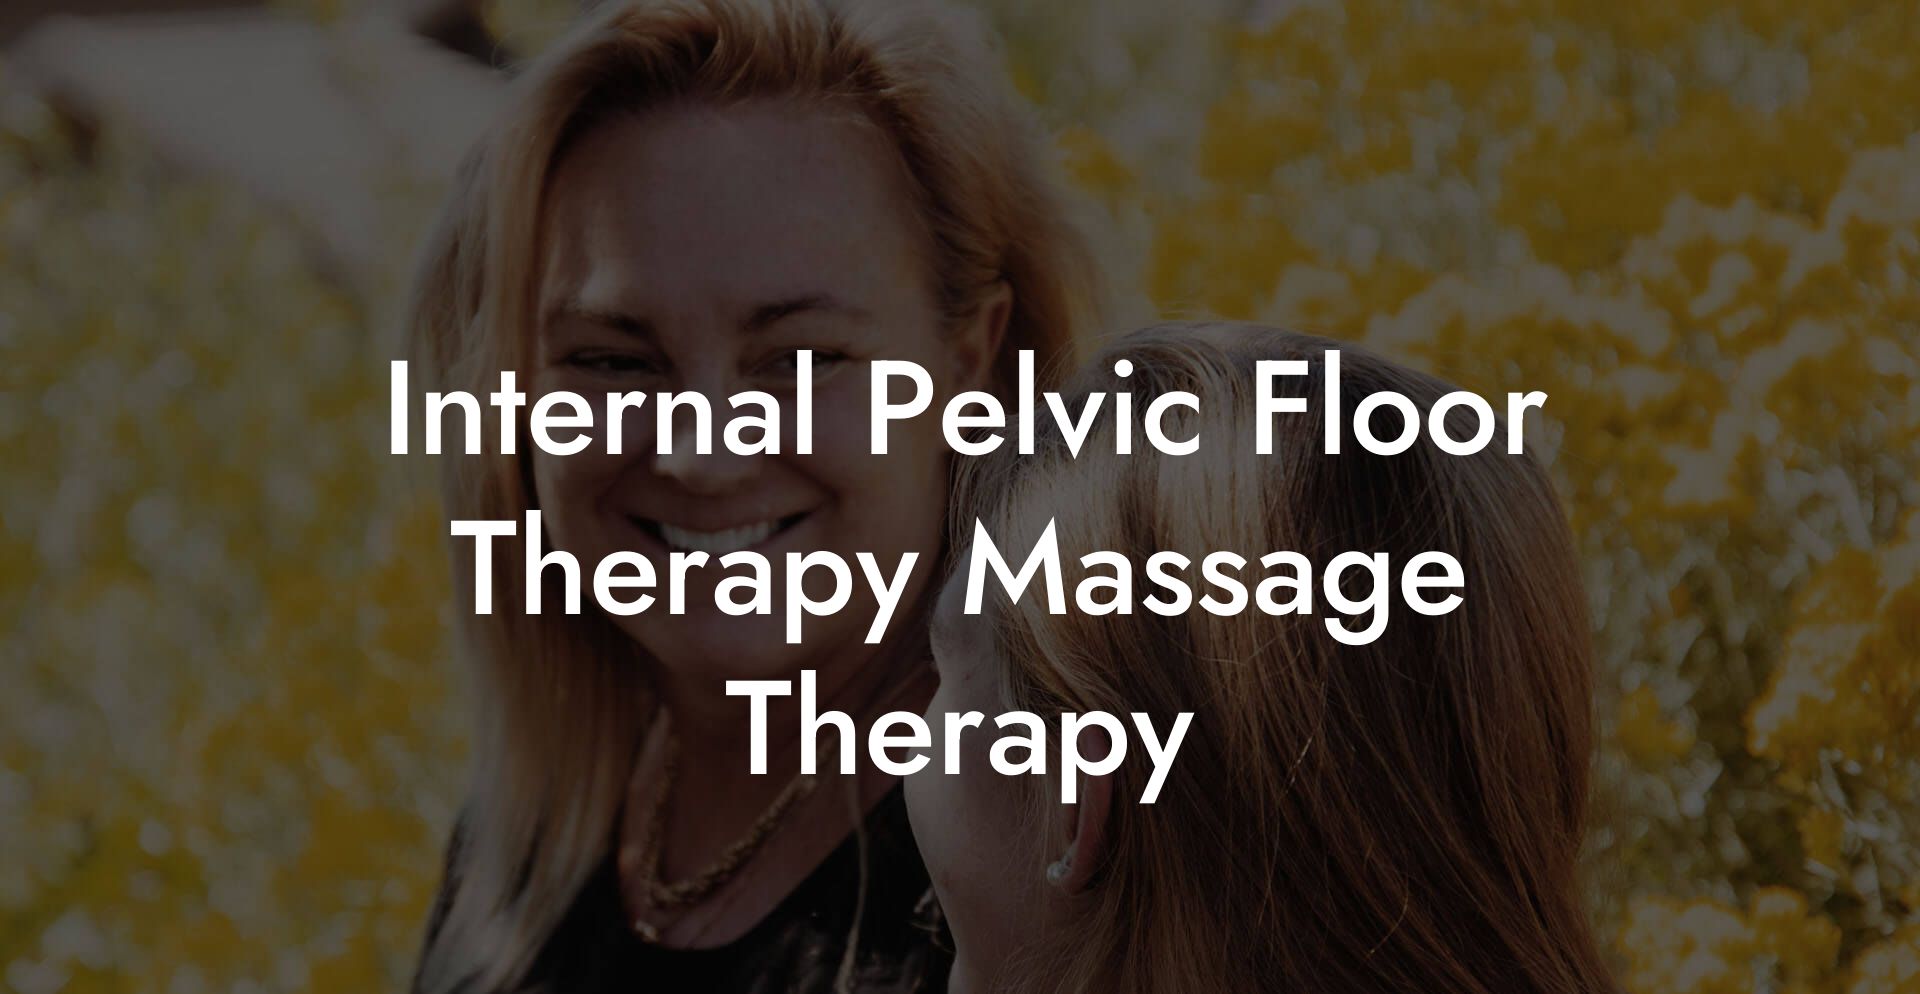 Internal Pelvic Floor Therapy Massage Therapy